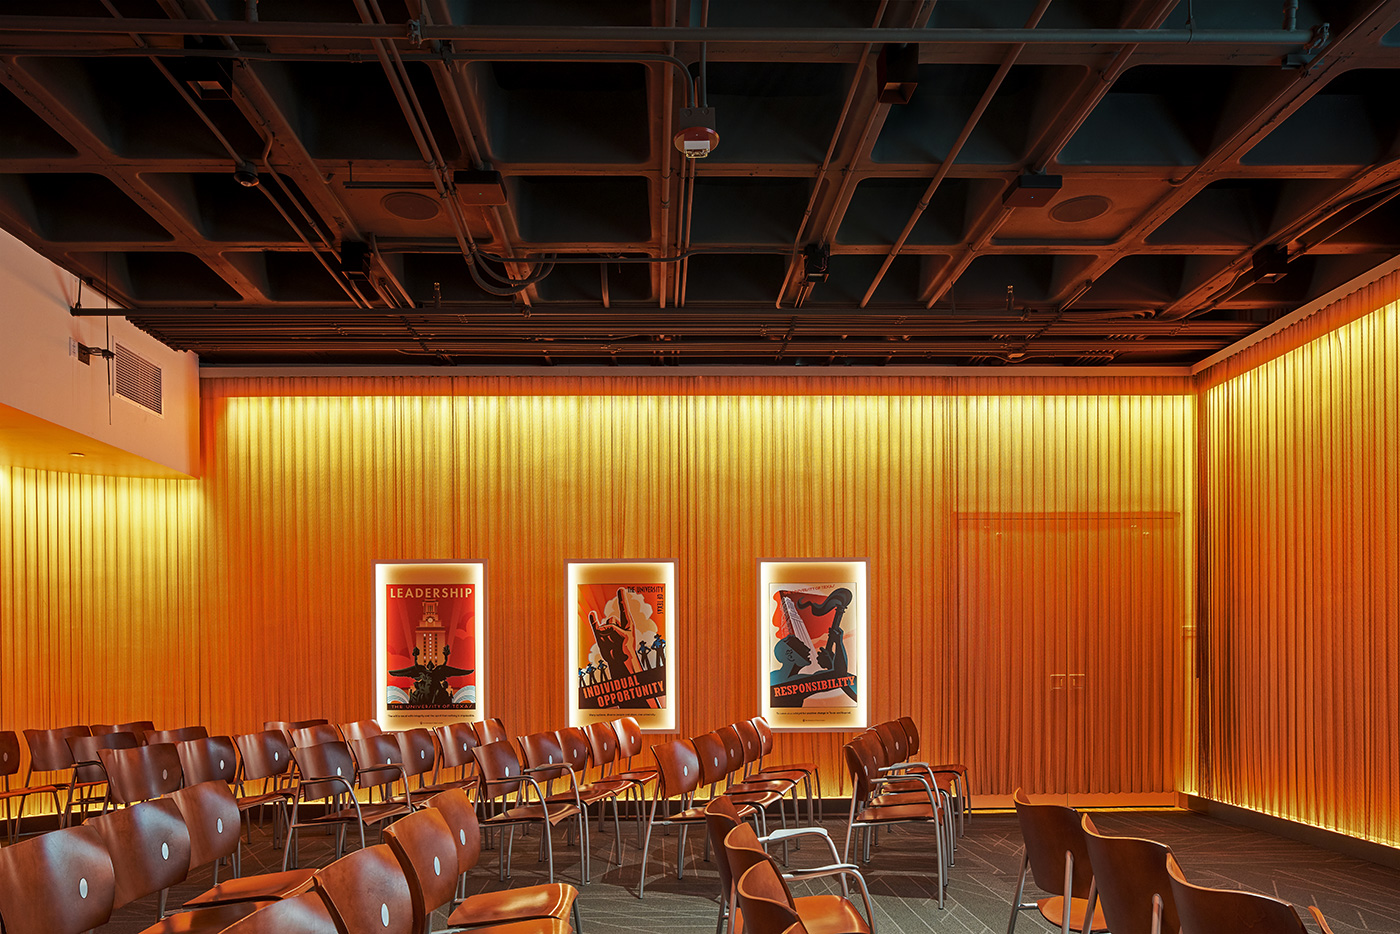 An auditorium room with orange lights coming down on walls.